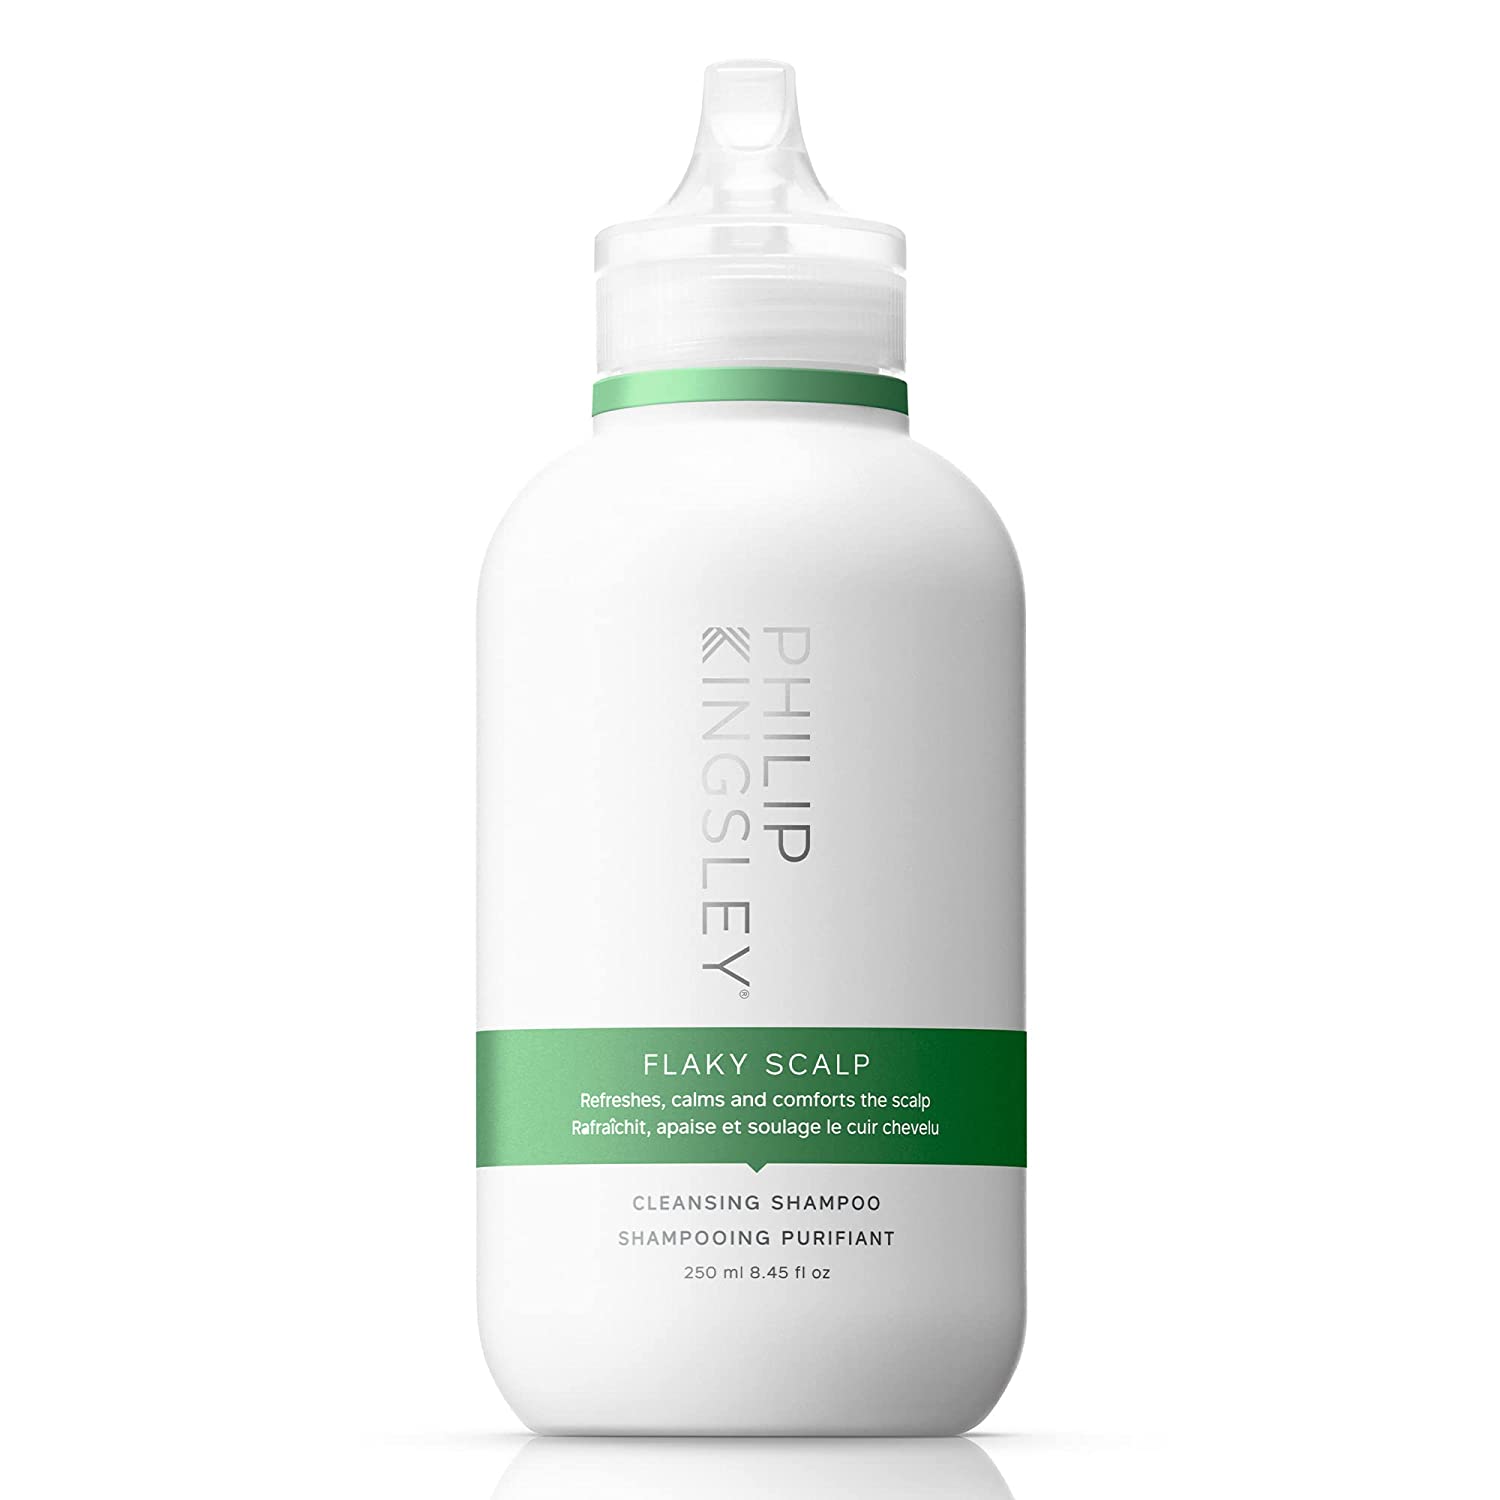  7. Philip Kingsley Flaky Scalp Cleansing Shampoo is the best for dandruff. 